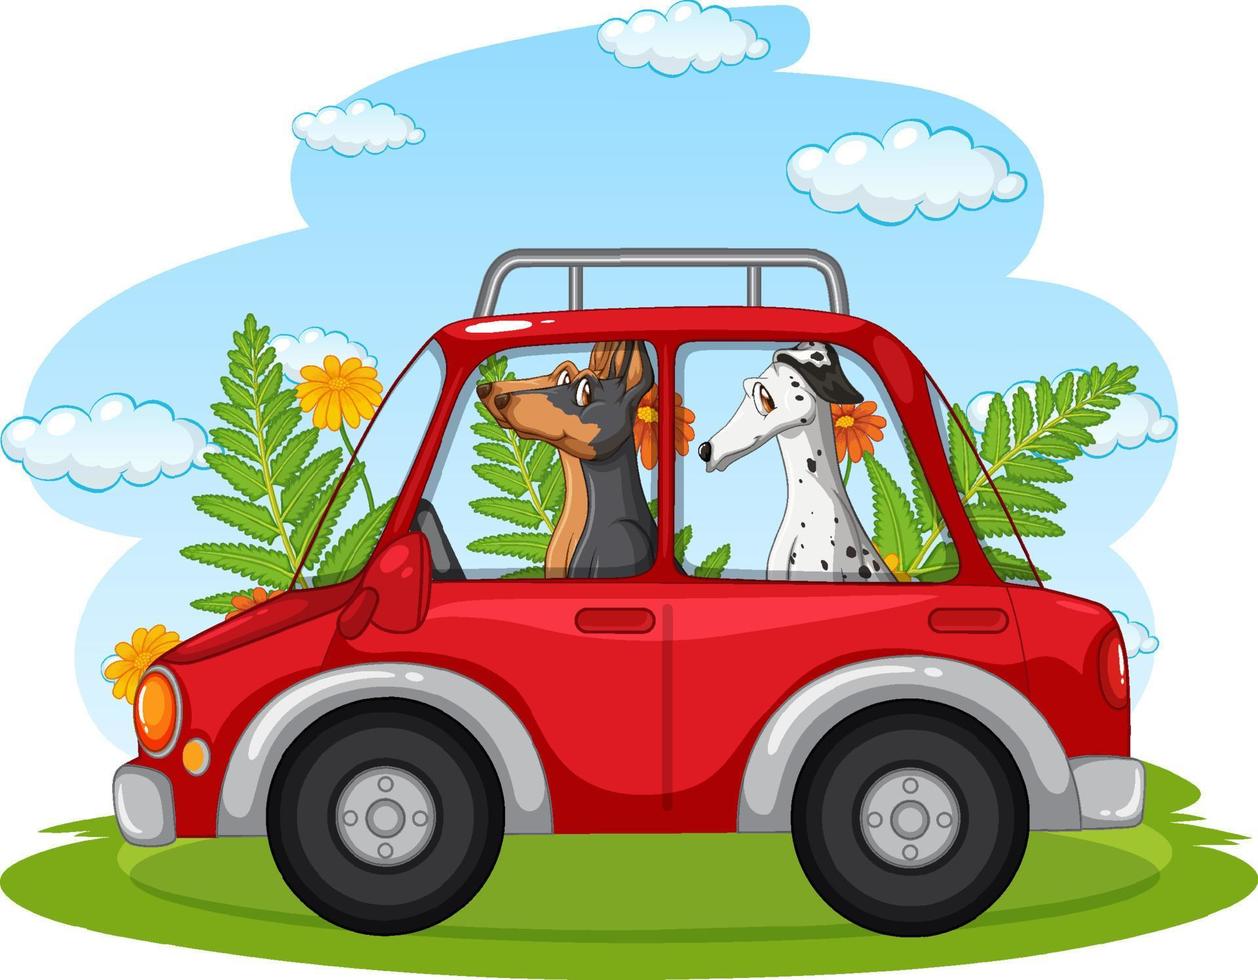 Two dogs riding in red car vector